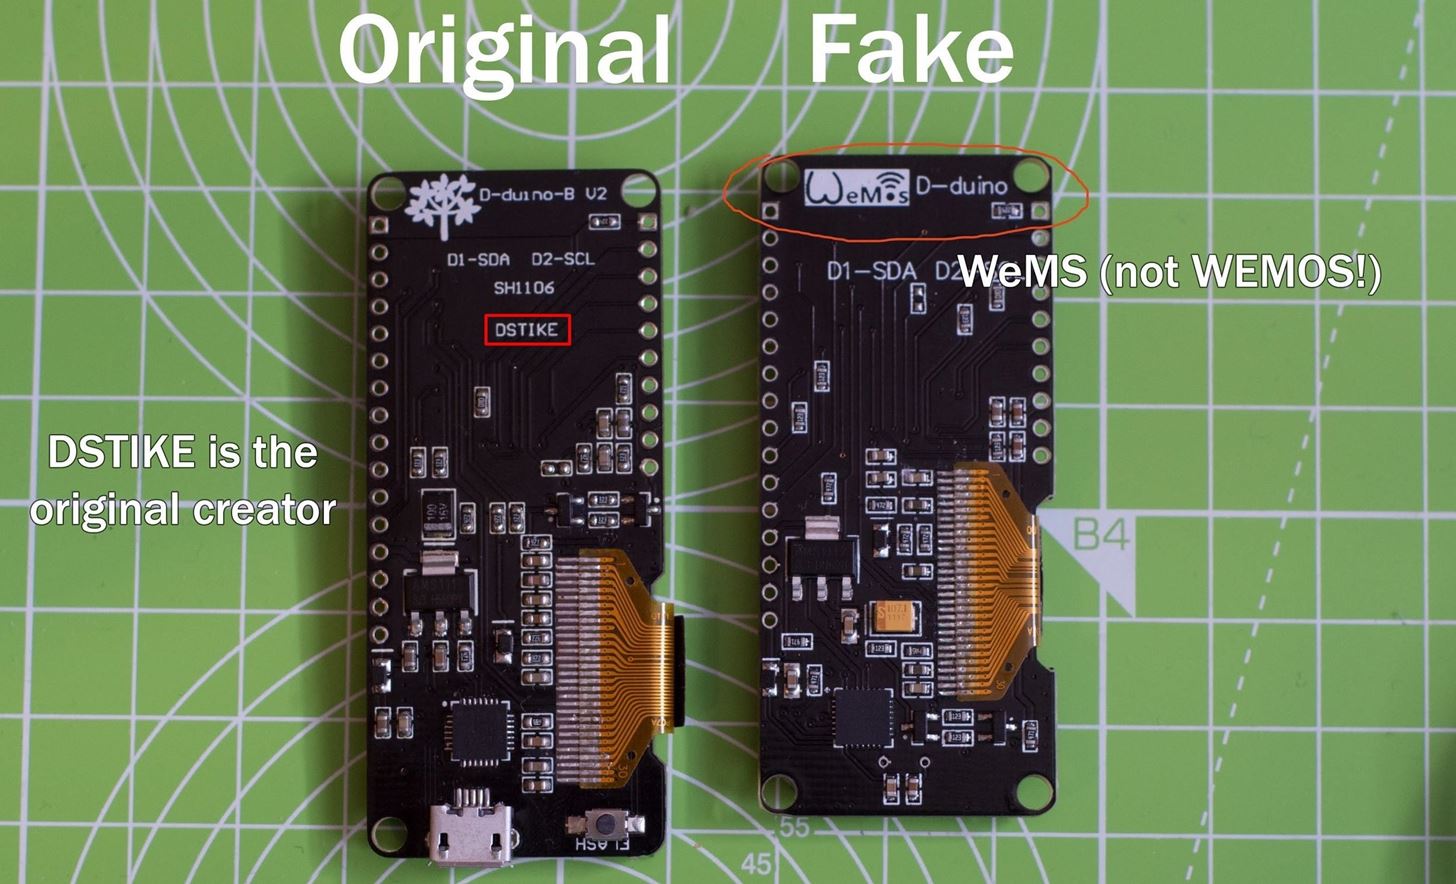 How to Scan, Fake & Attack Wi-Fi Networks with the ESP8266-Based WiFi Deauther